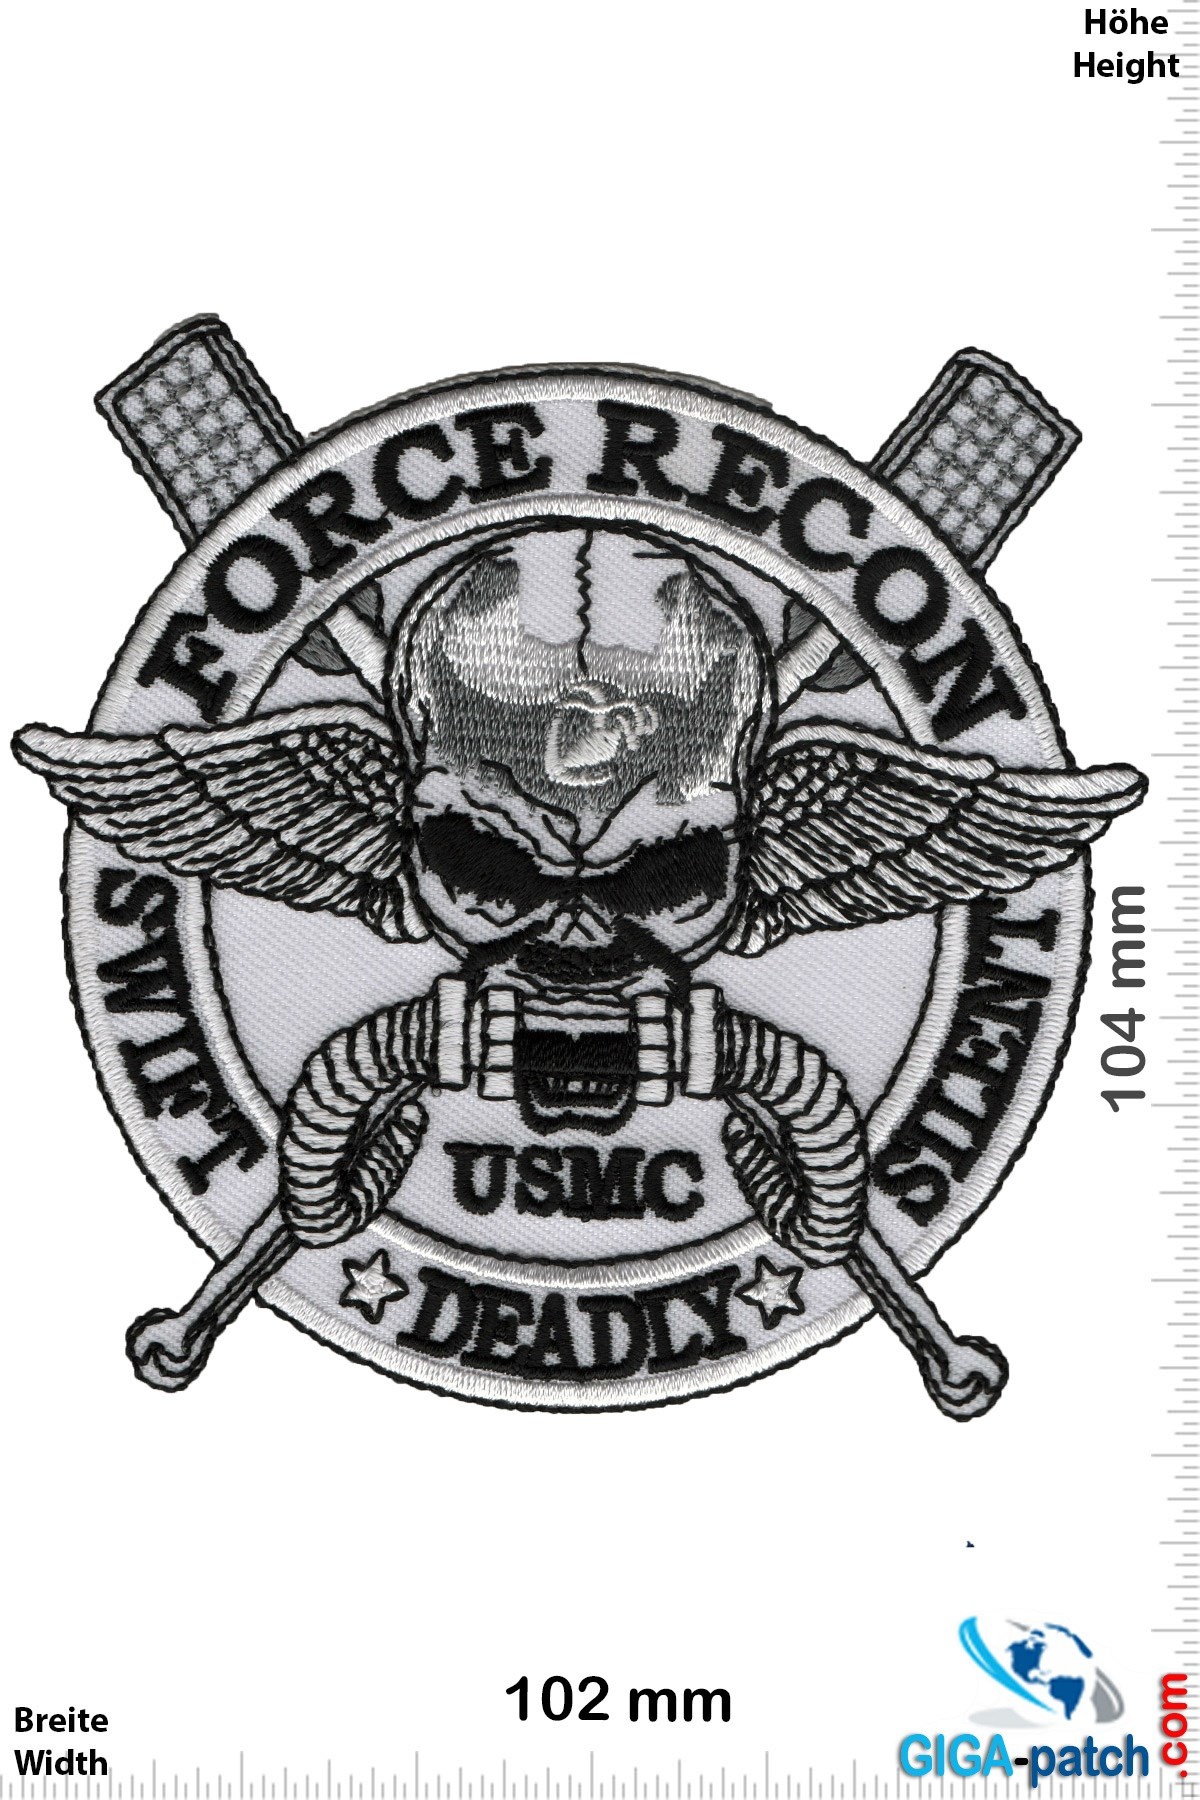 Navy Force Recon - United States Marine Corps - Swift Deadly Silent